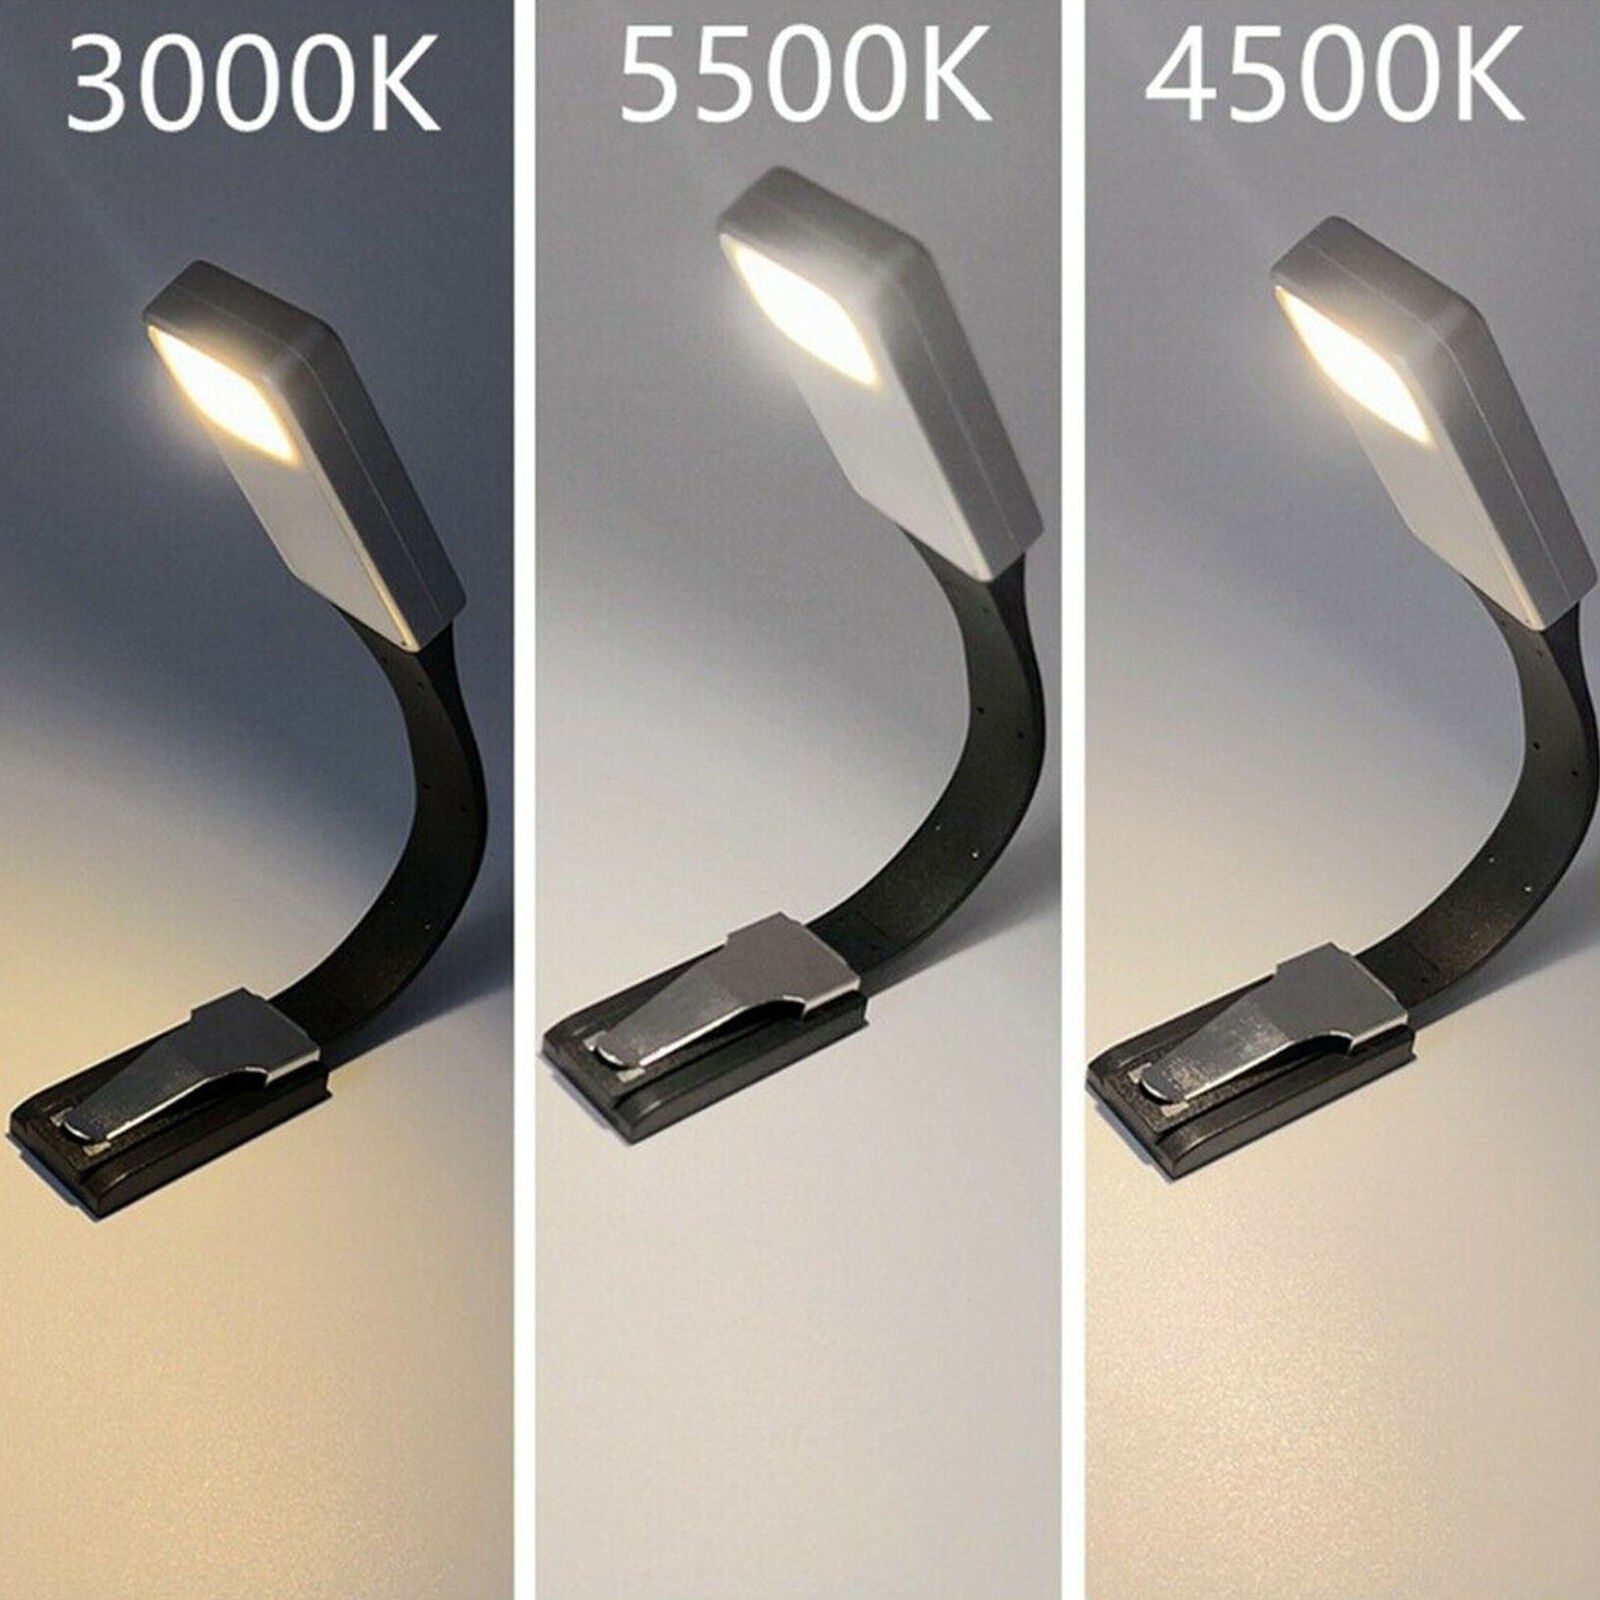 Clamp lamp clip LED clip reading lamp with LED power book lamp lamp lamp thin